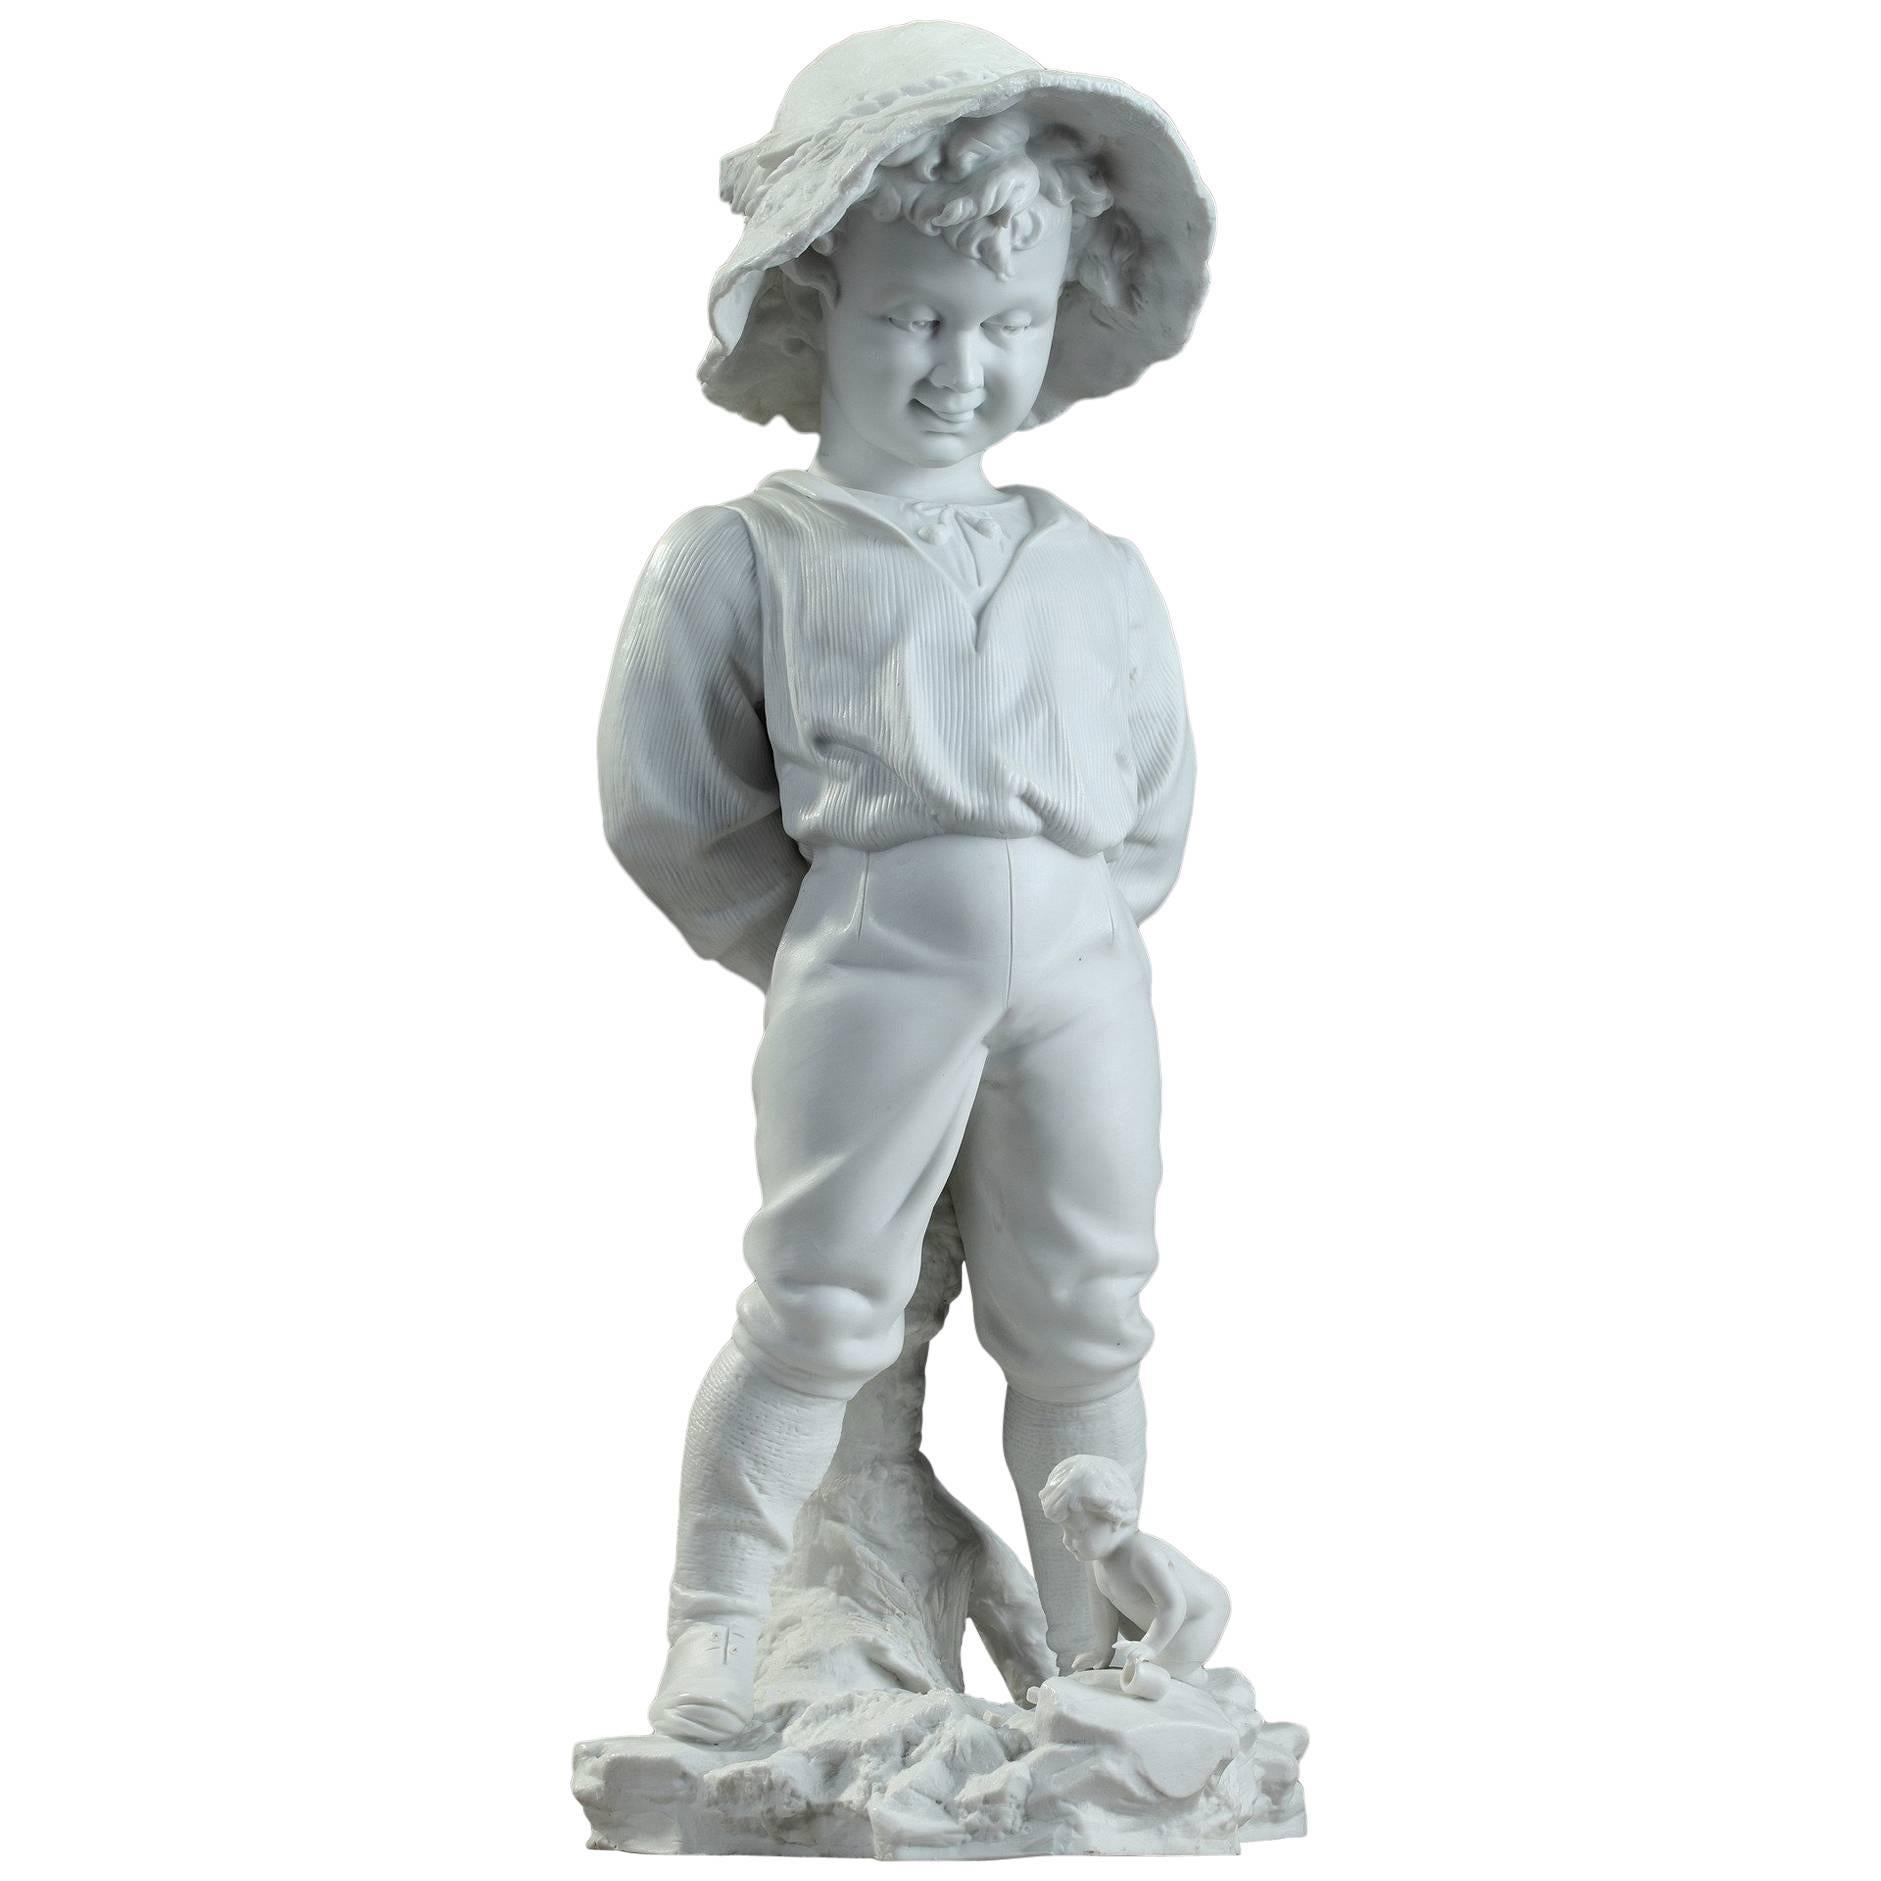 Late 19th Century Samson Bisque Statue Child with a Hat